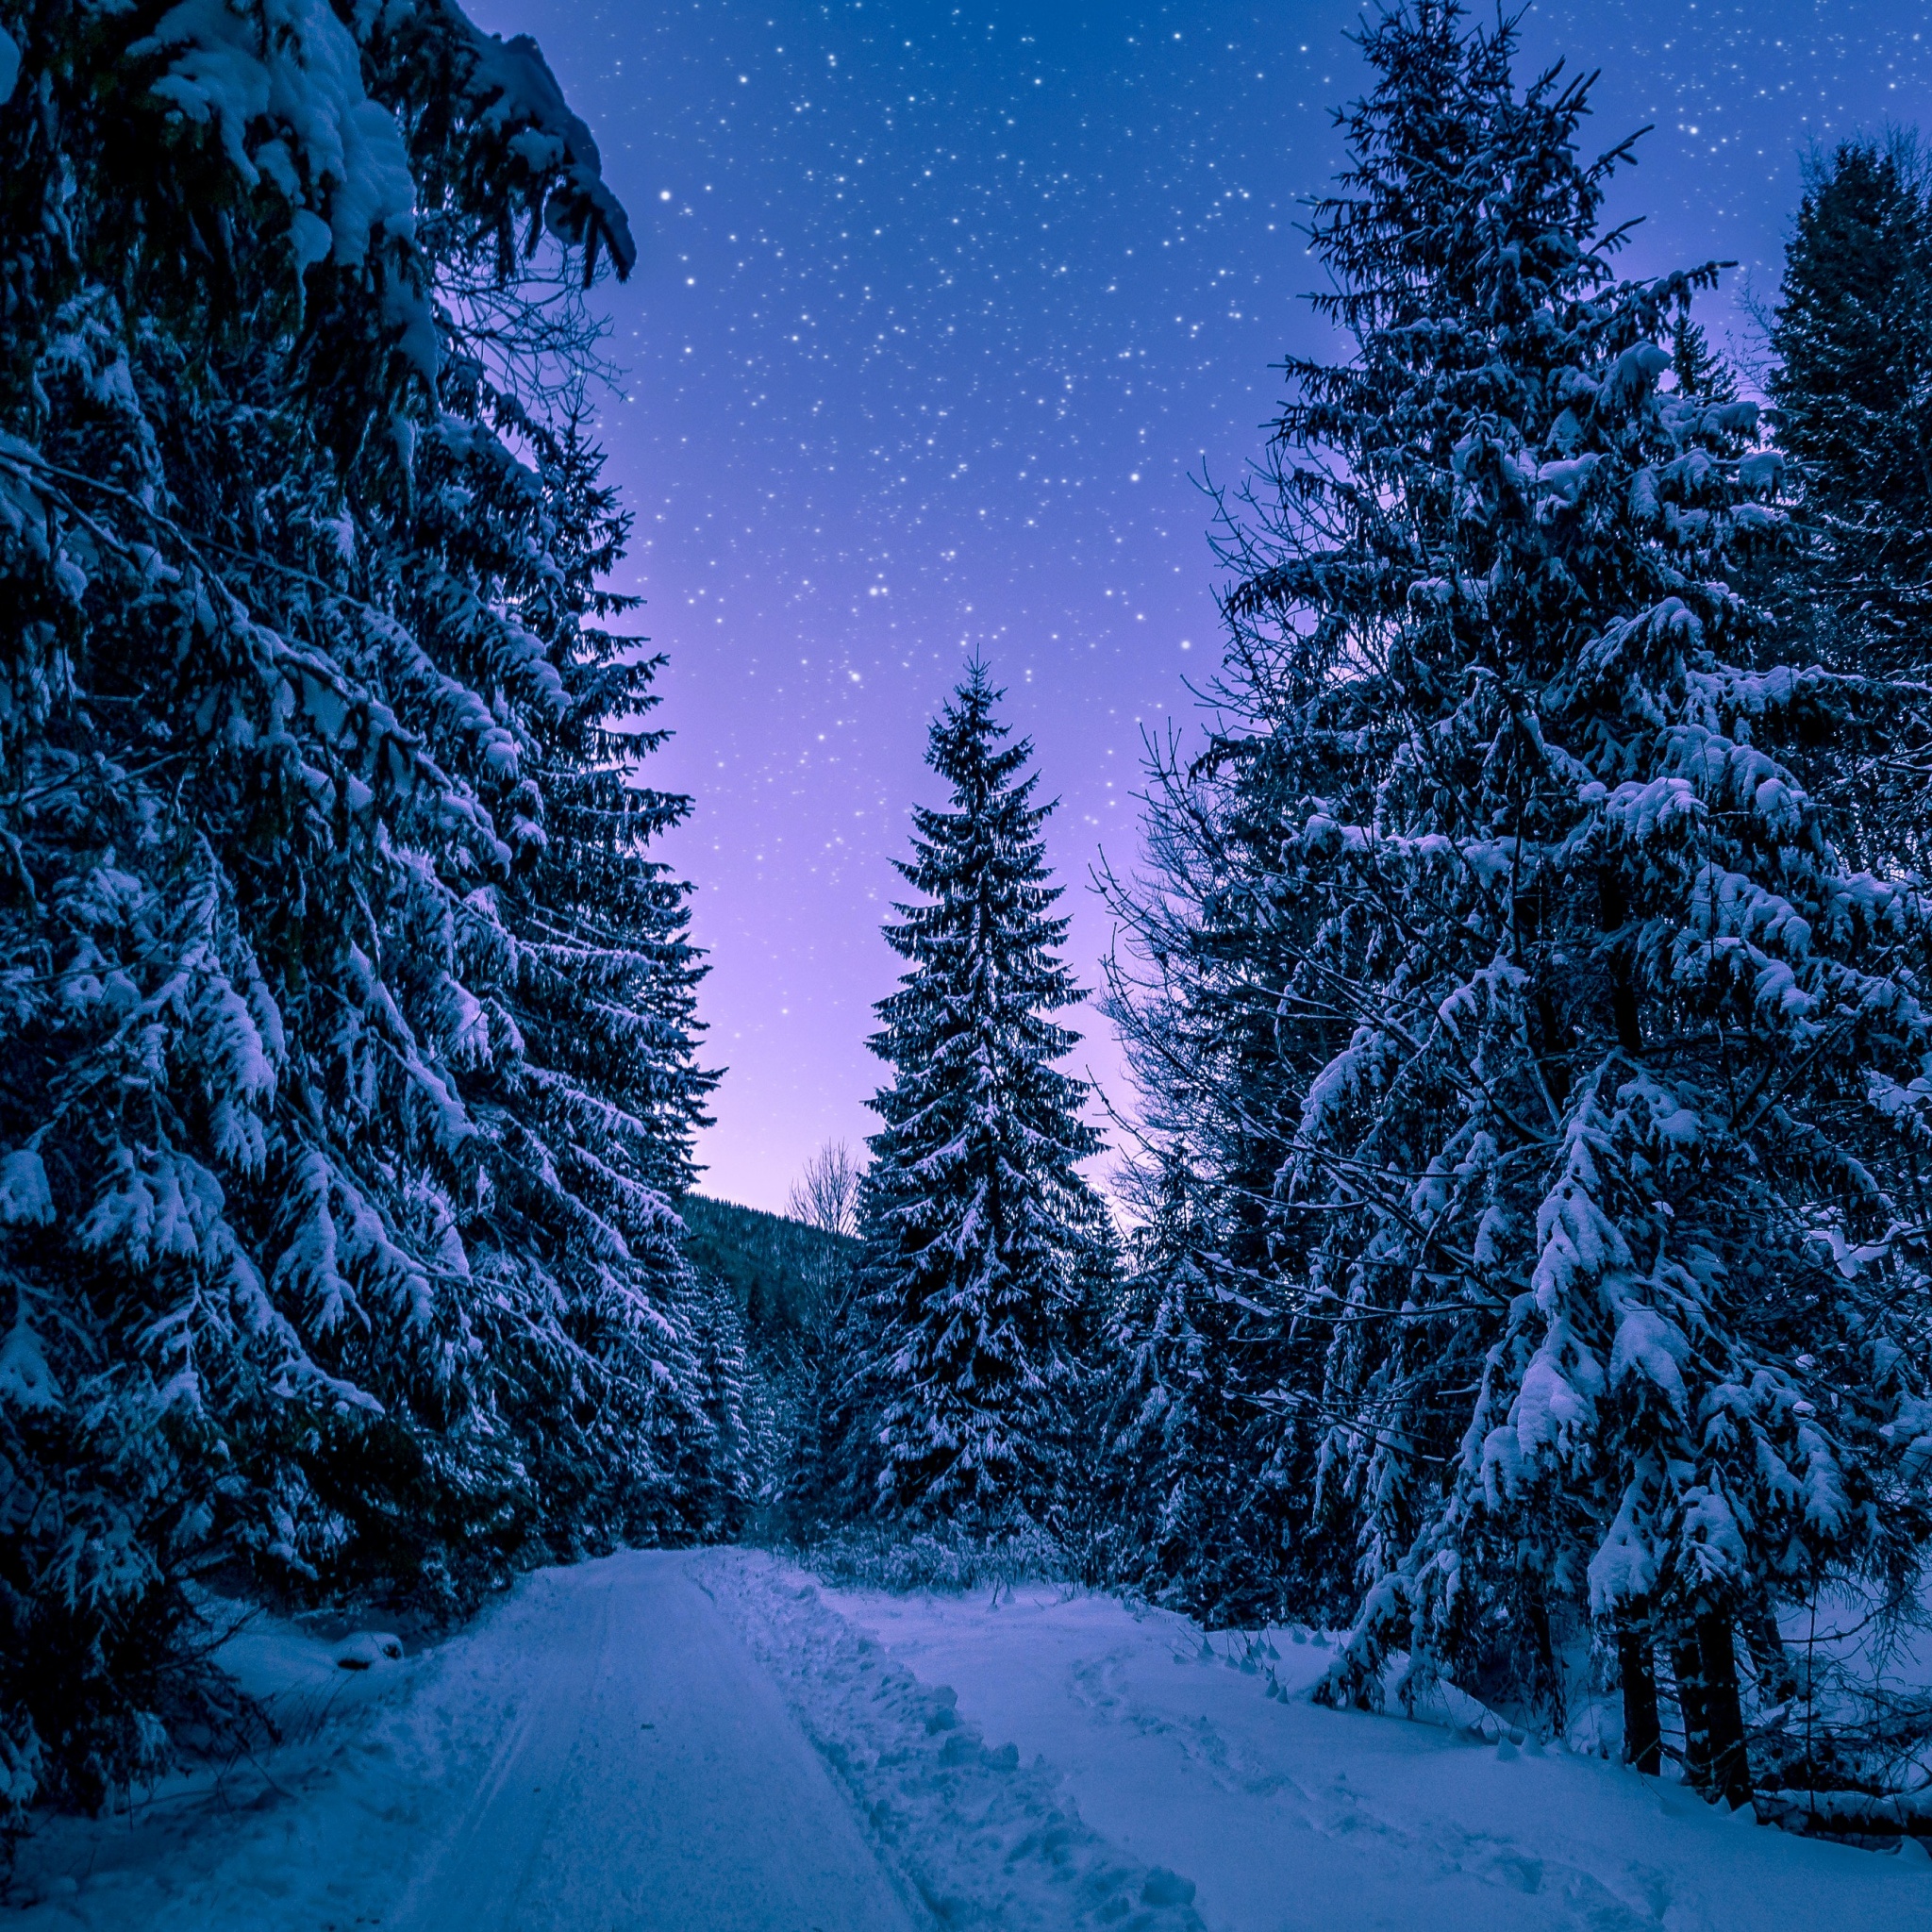 Snowy Trees Wallpaper 4K, Winter, Forest, Frozen, Snow covered, Night sky, Nature